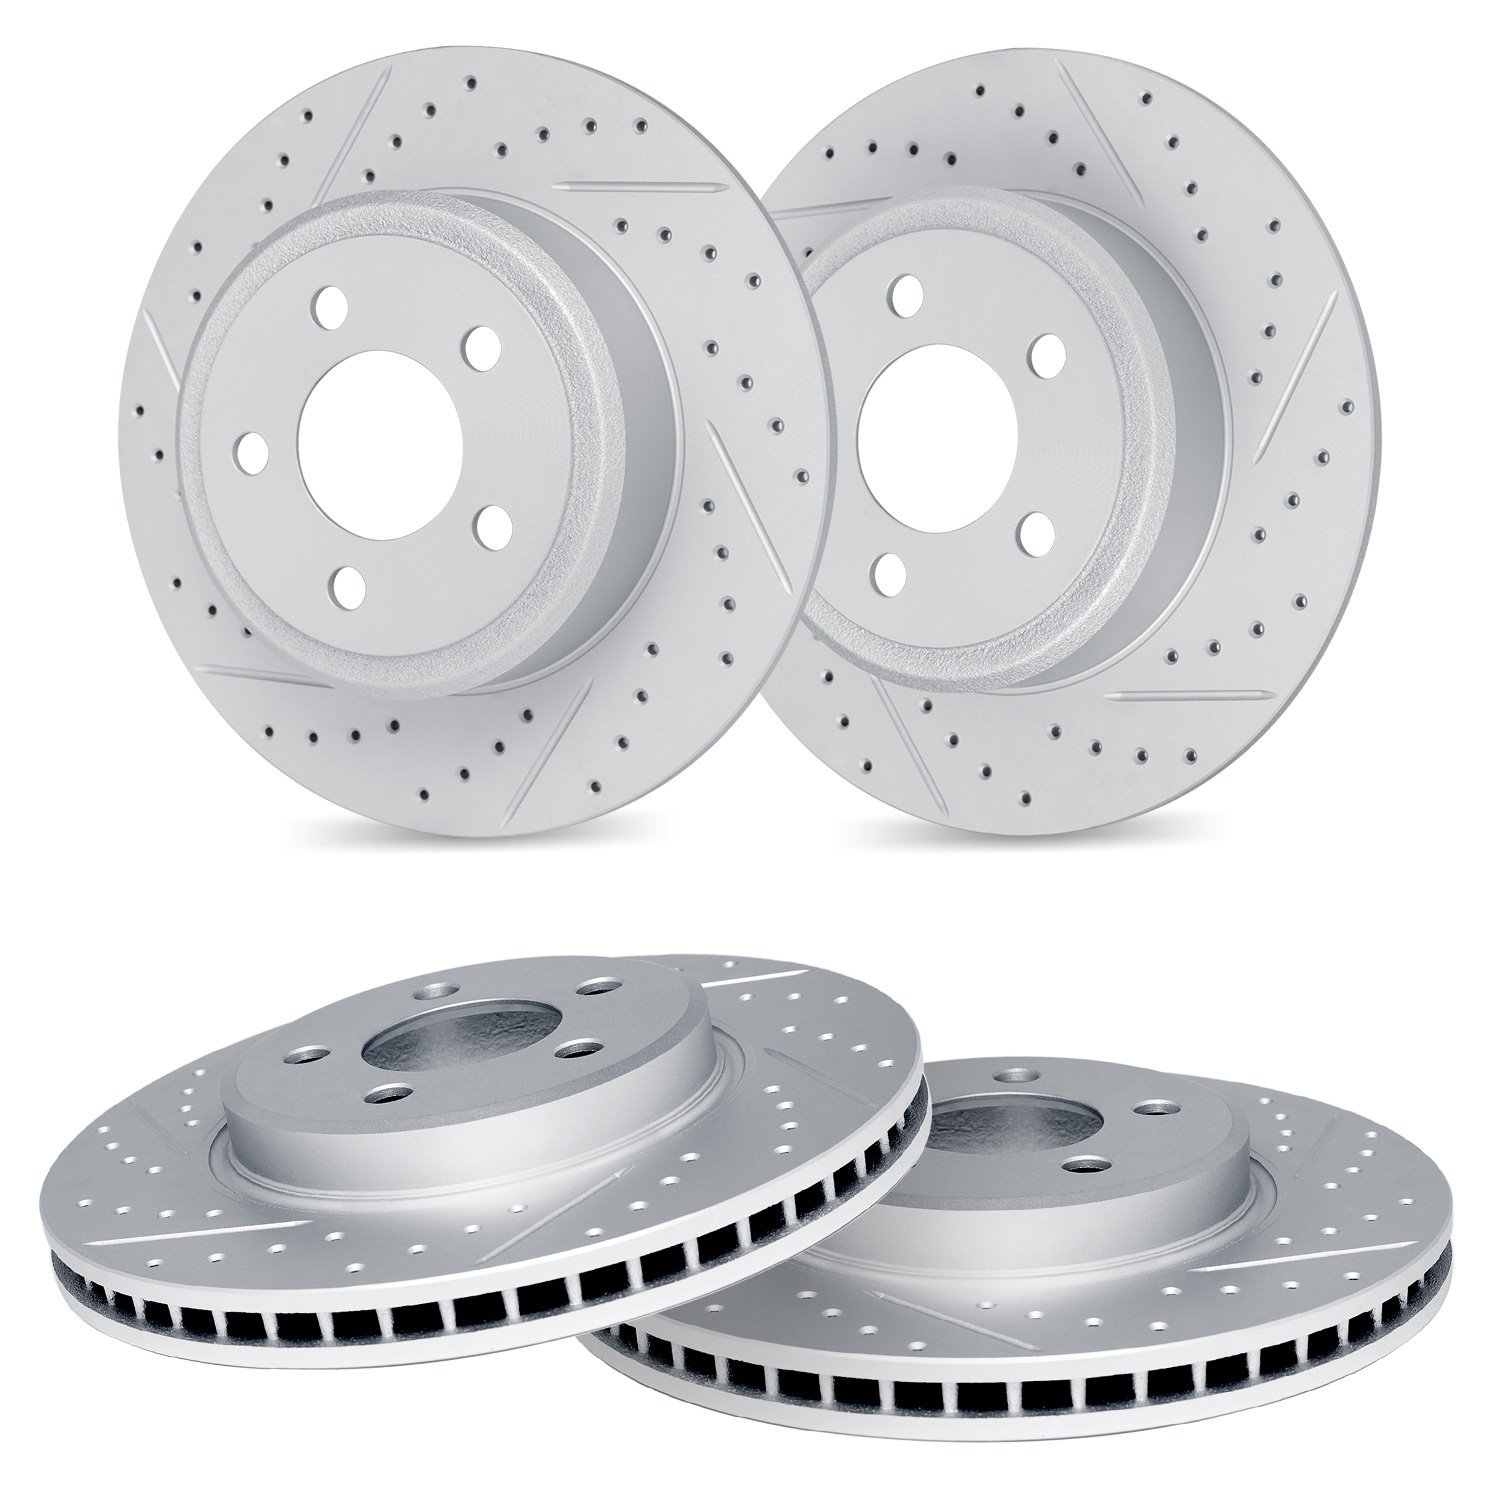 GEO-Carbon Drilled & Slotted Brake Rotor Set, Fits Select Acura/Honda, Position: Rear